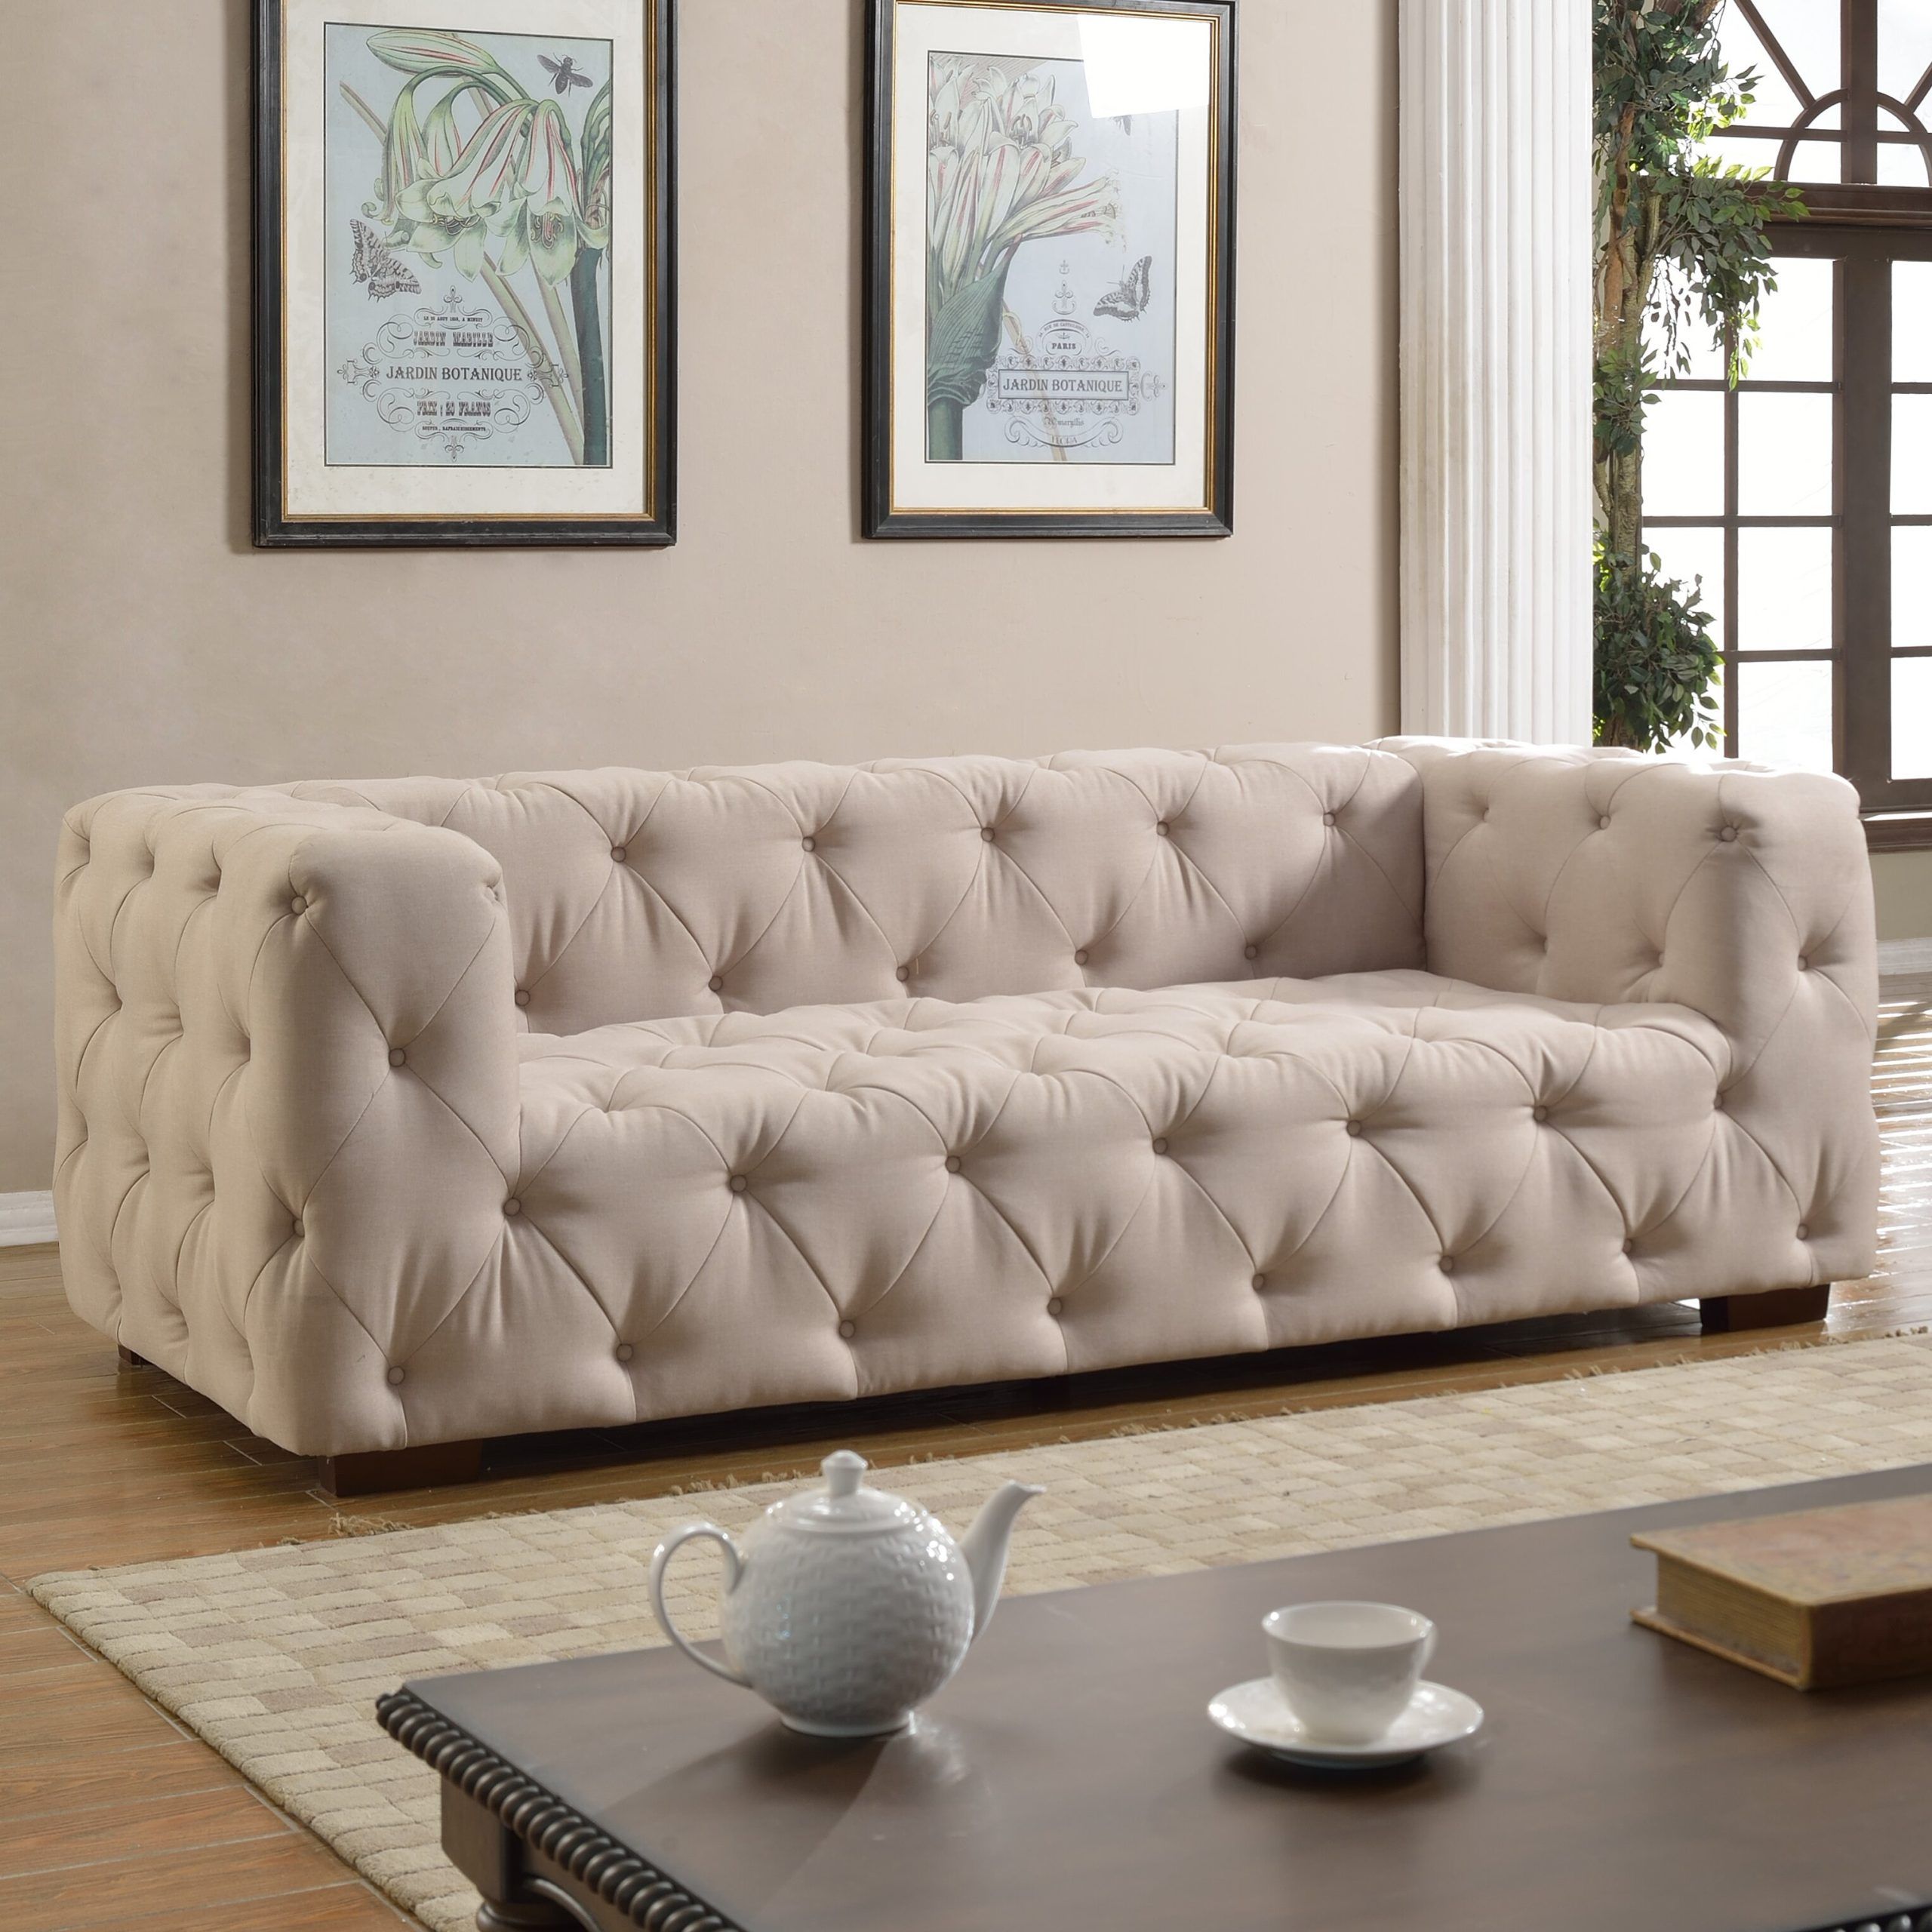 Tufted Large Sofa | Wayfair For Tufted Upholstered Sofas (Gallery 18 of 20)